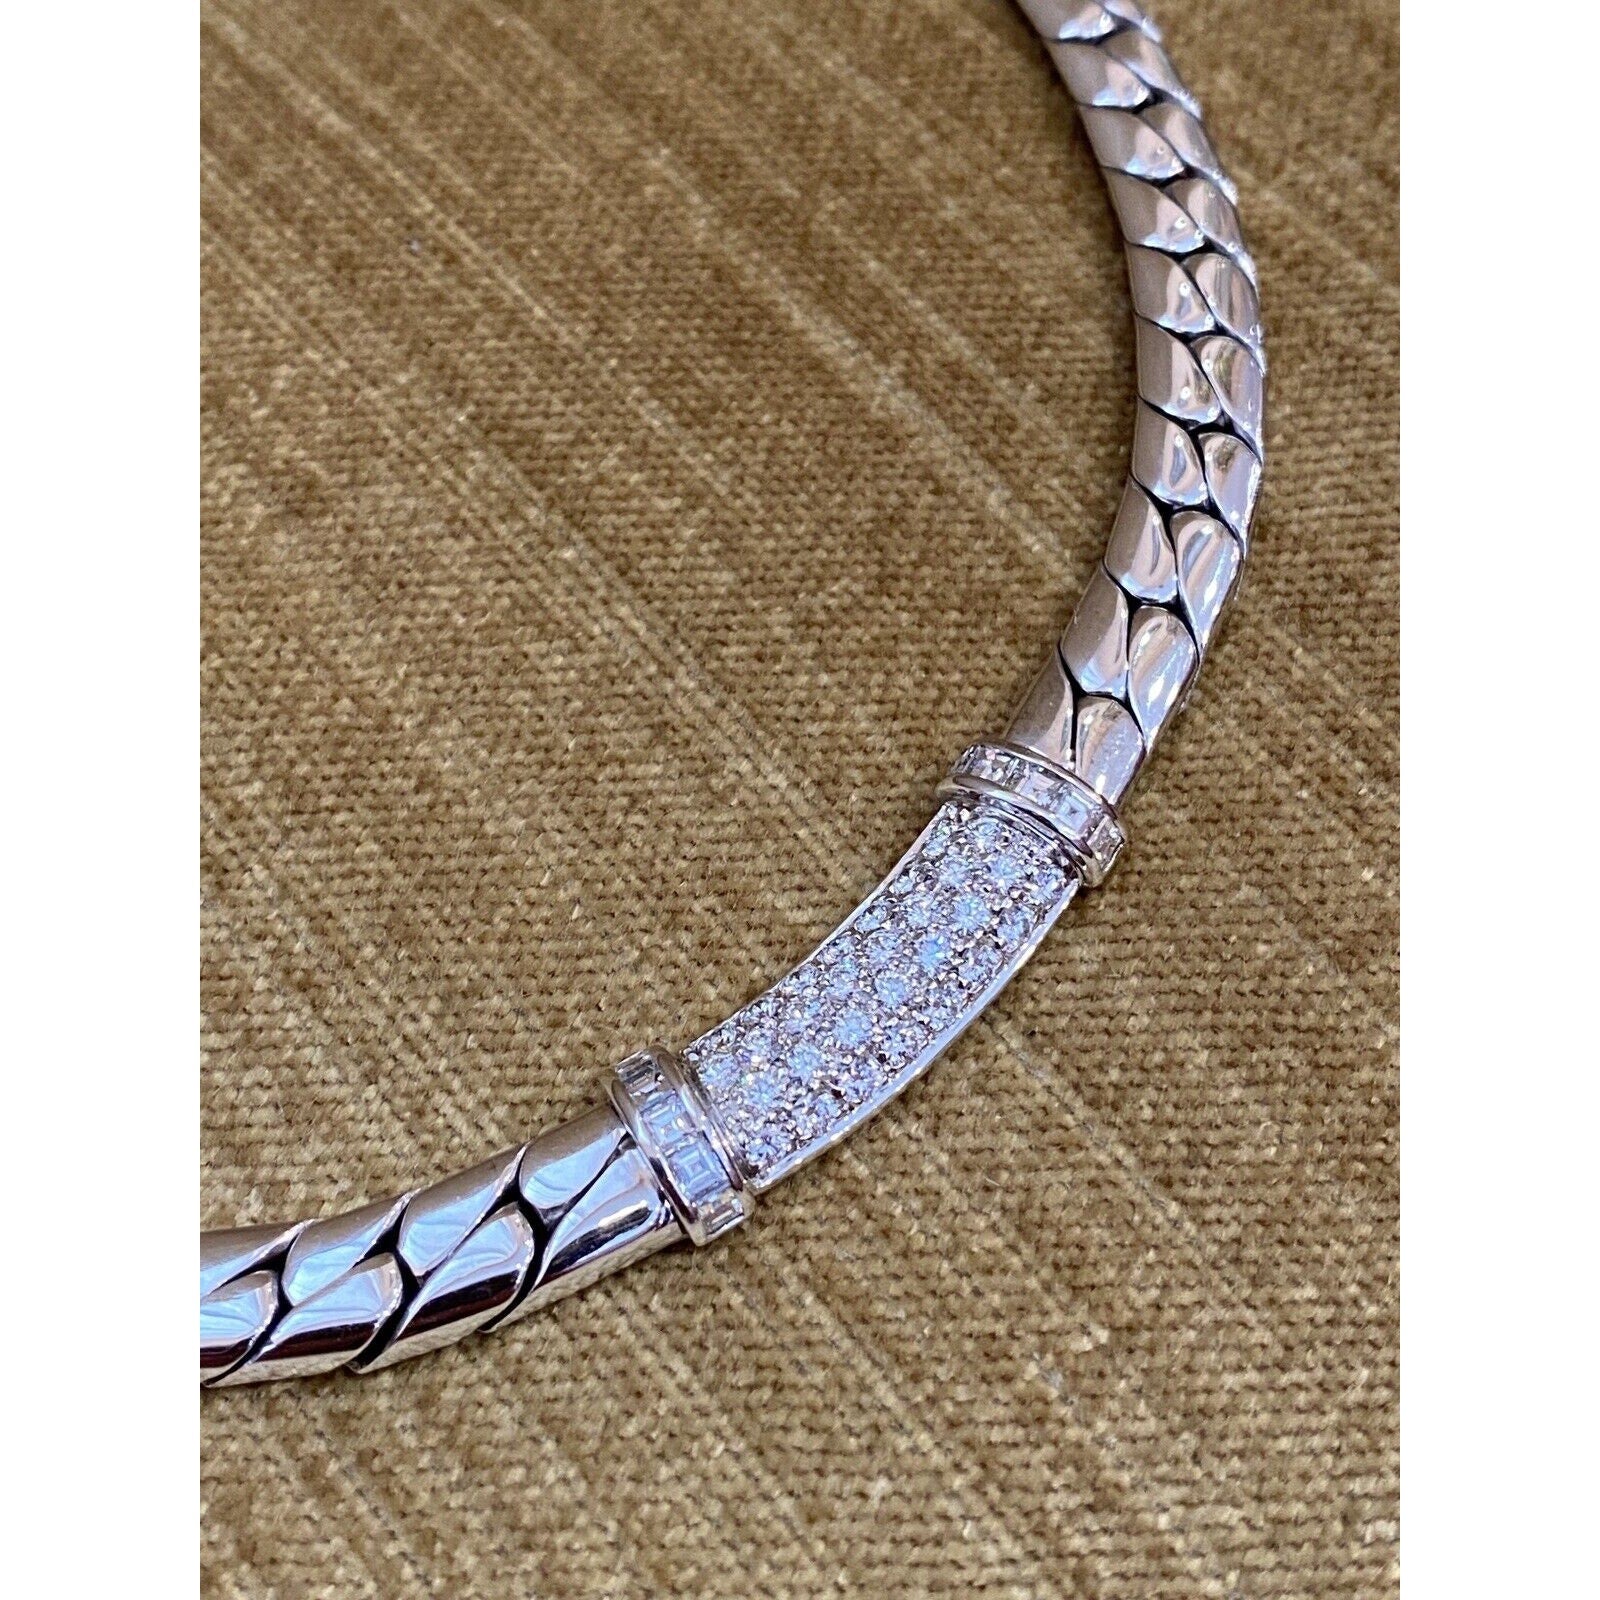 PICCHIOTTI Pave Diamond Curb Link Necklace in 18k White Gold- HM2307BR